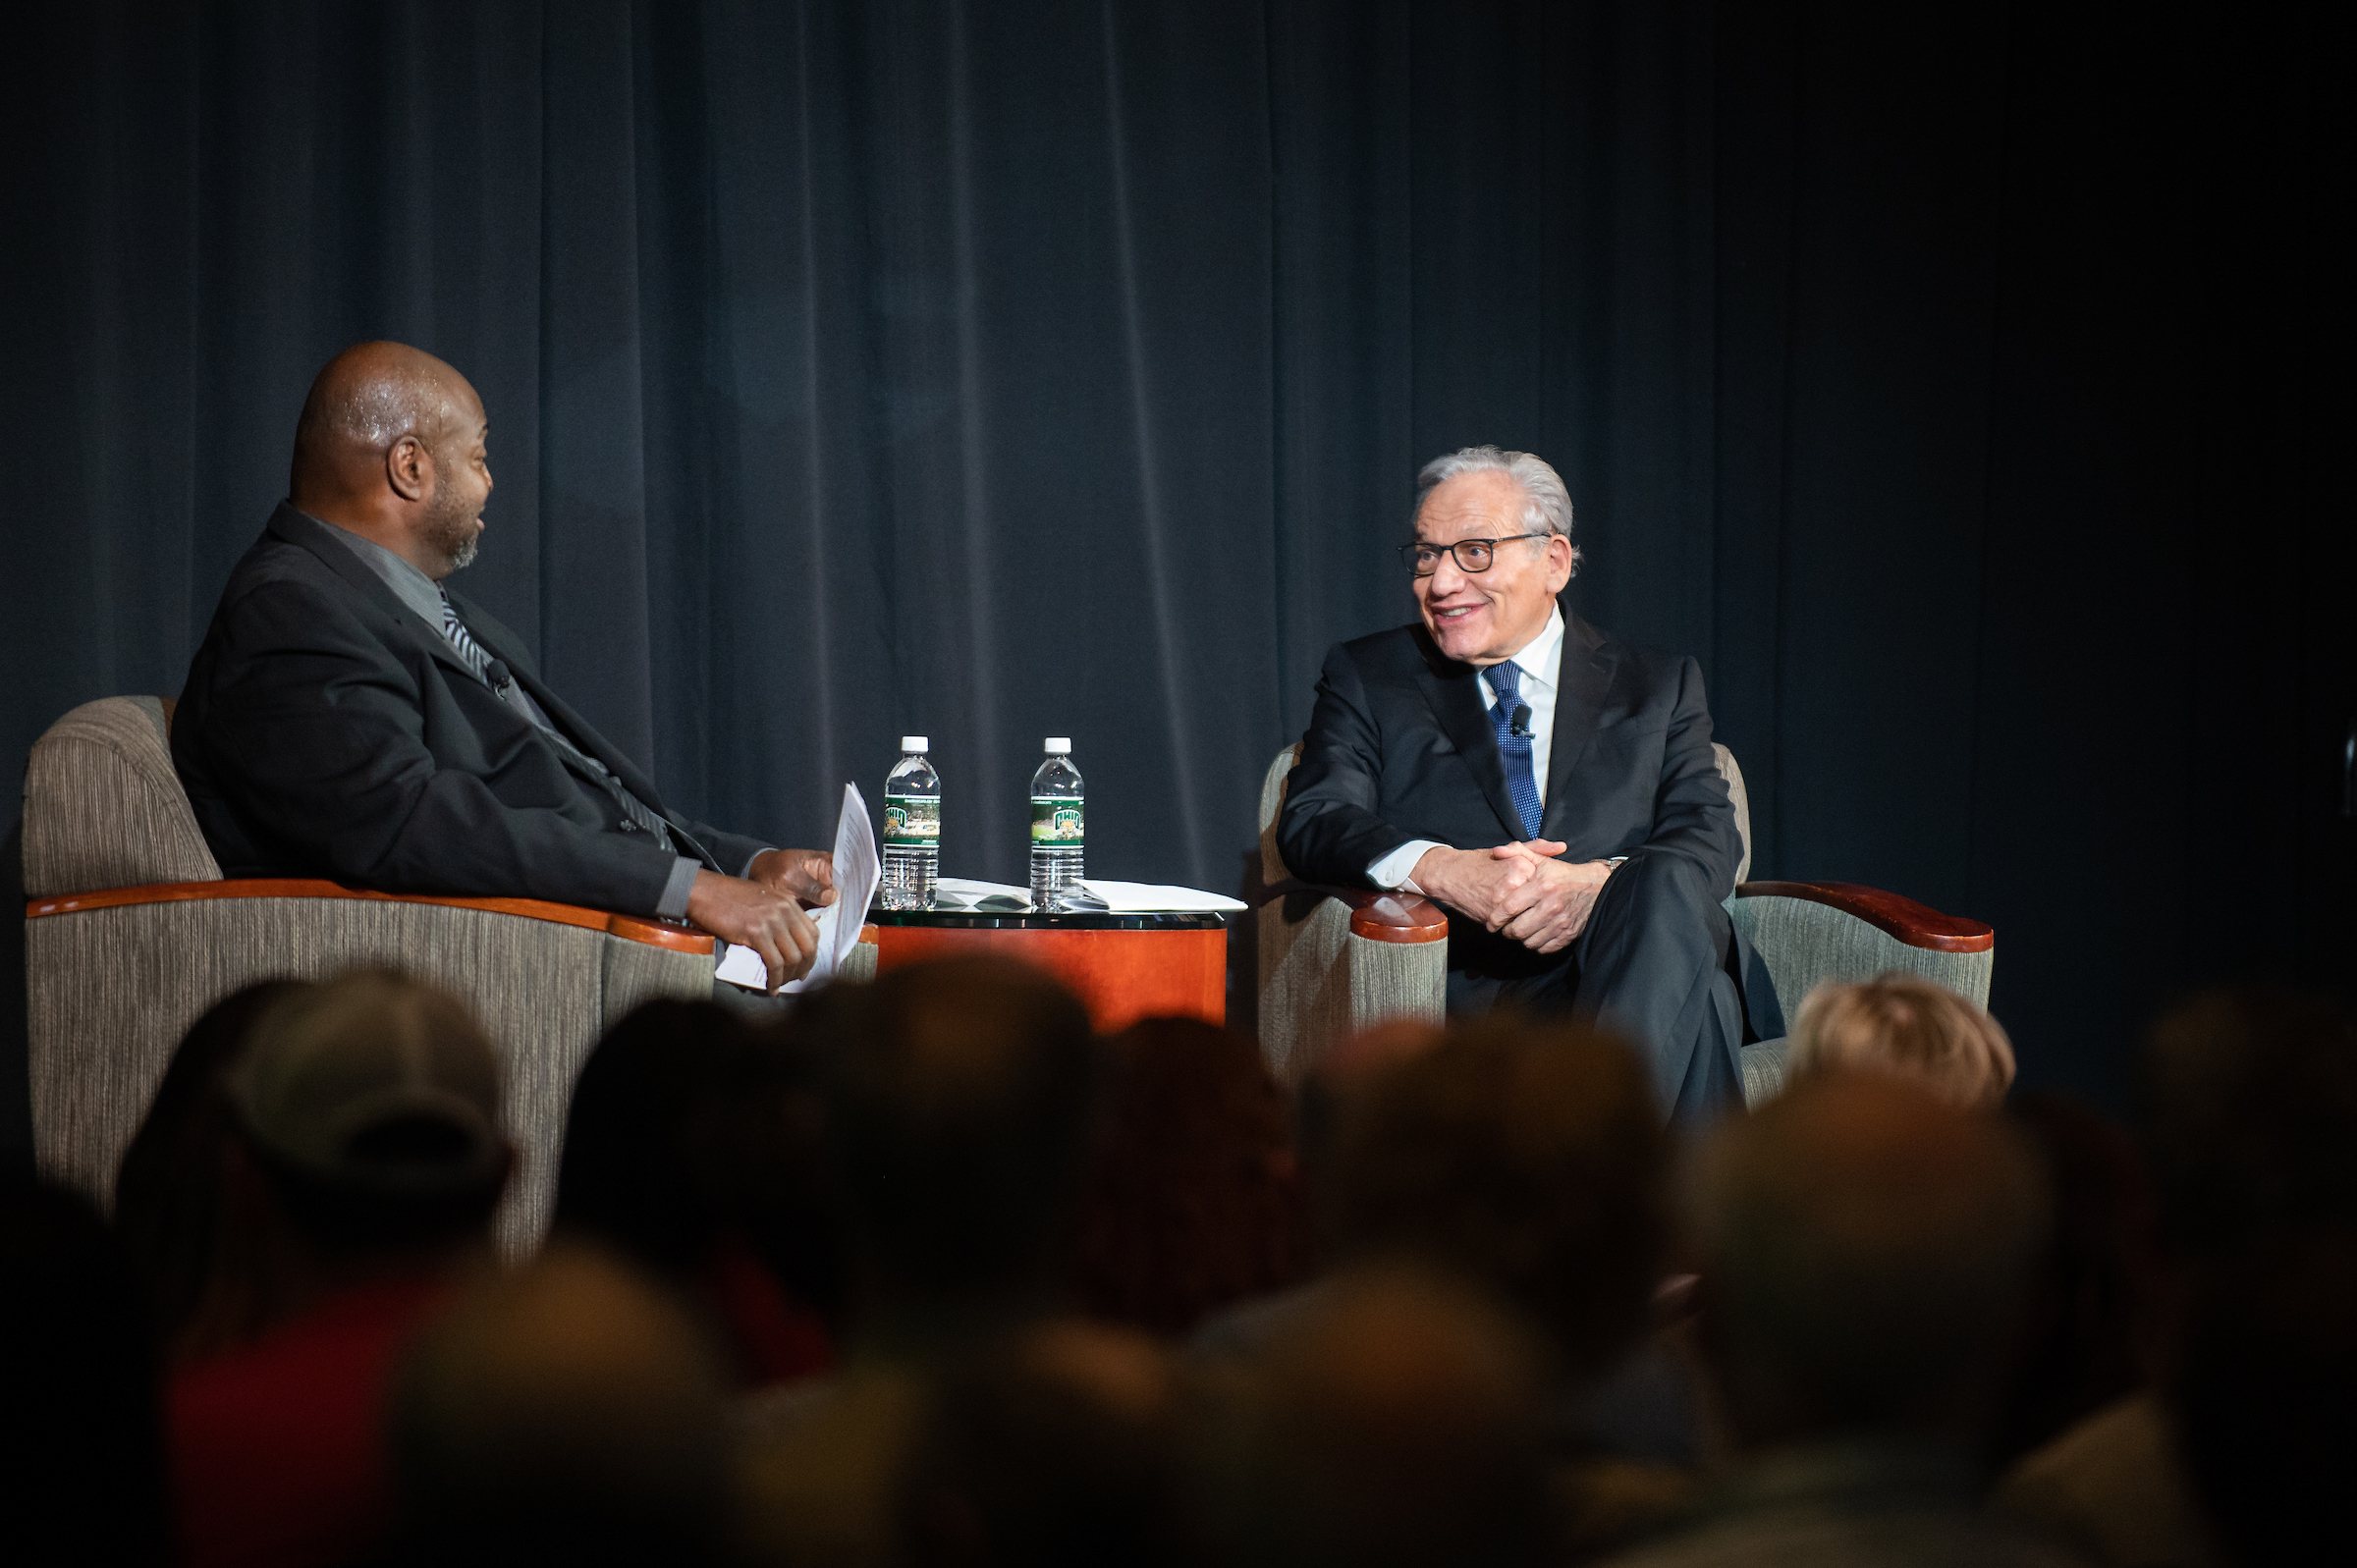 Bob Woodward is shown on stage with moderator Mark Turner